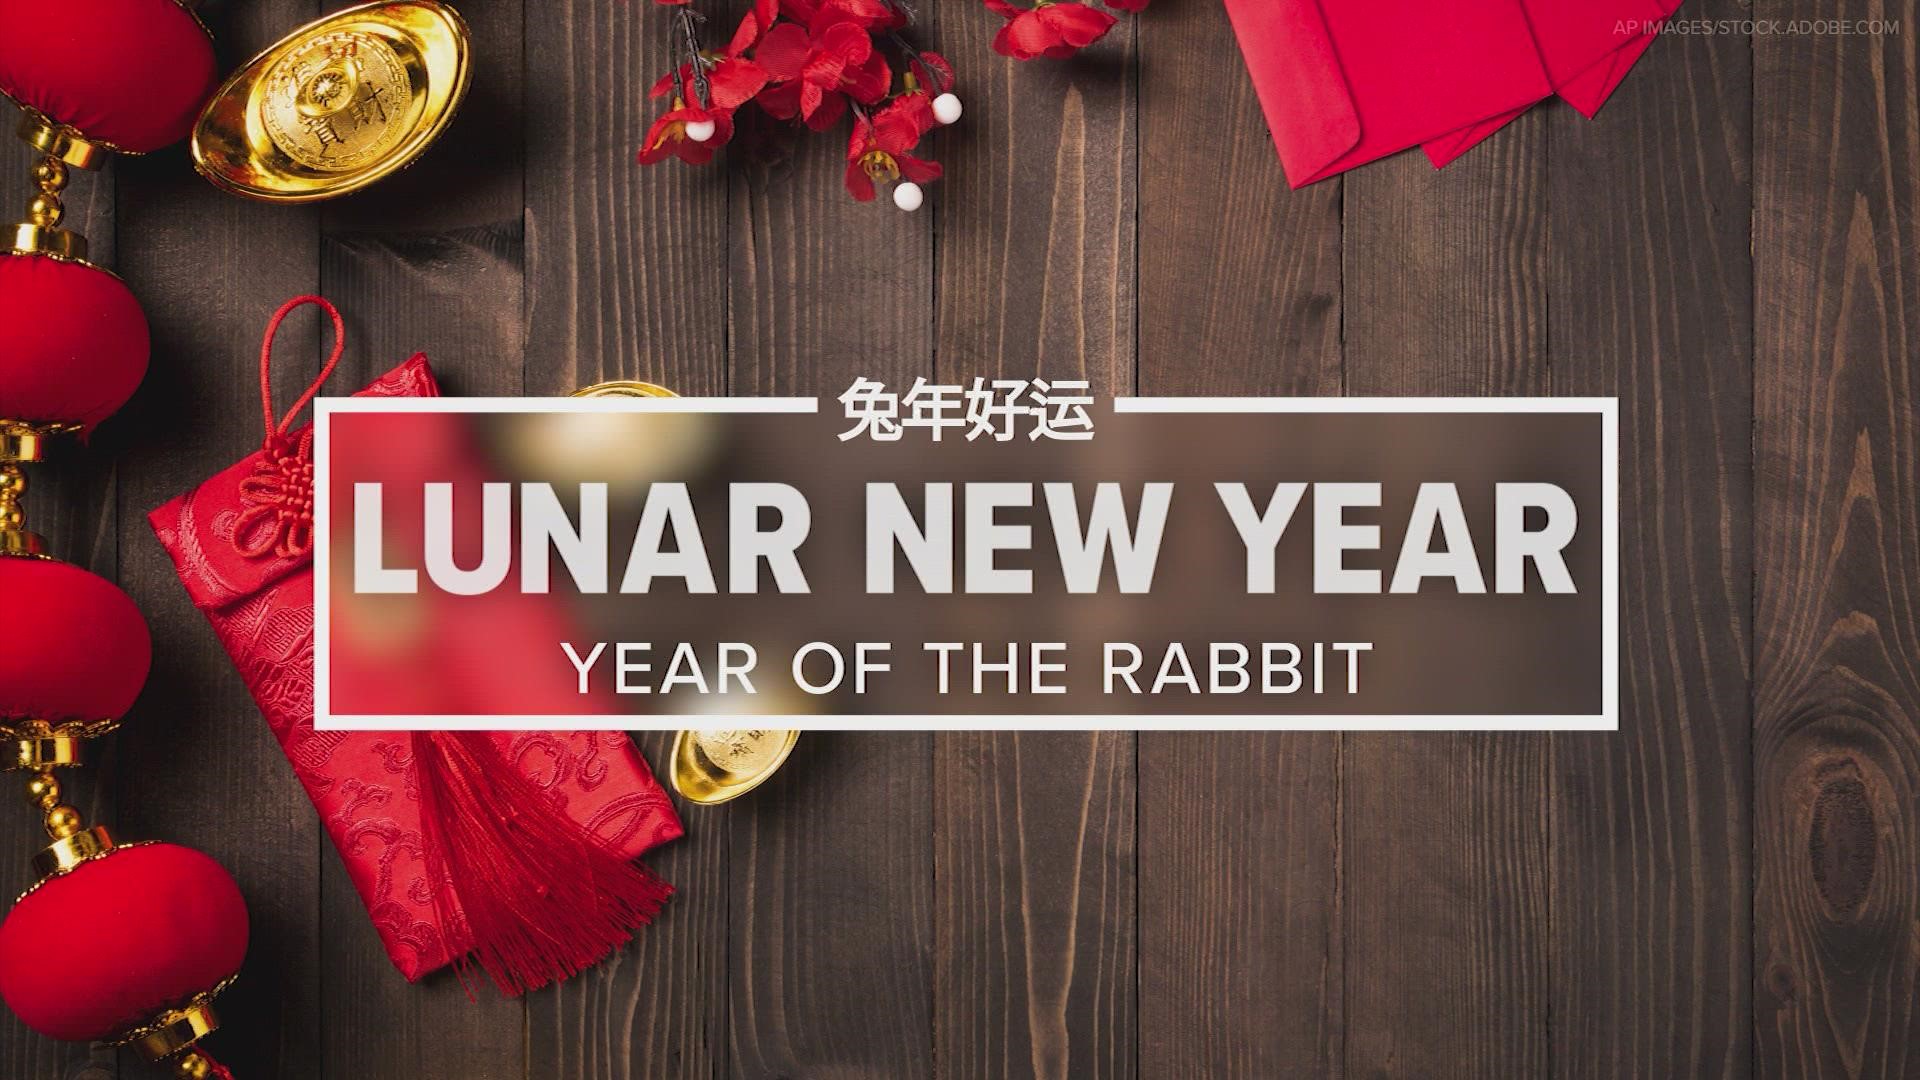 On Sunday, Jan. 22, more than a billion people around the world will celebrate the Lunar New Year. It's often referred to as Chinese New Year or Spring Festival.